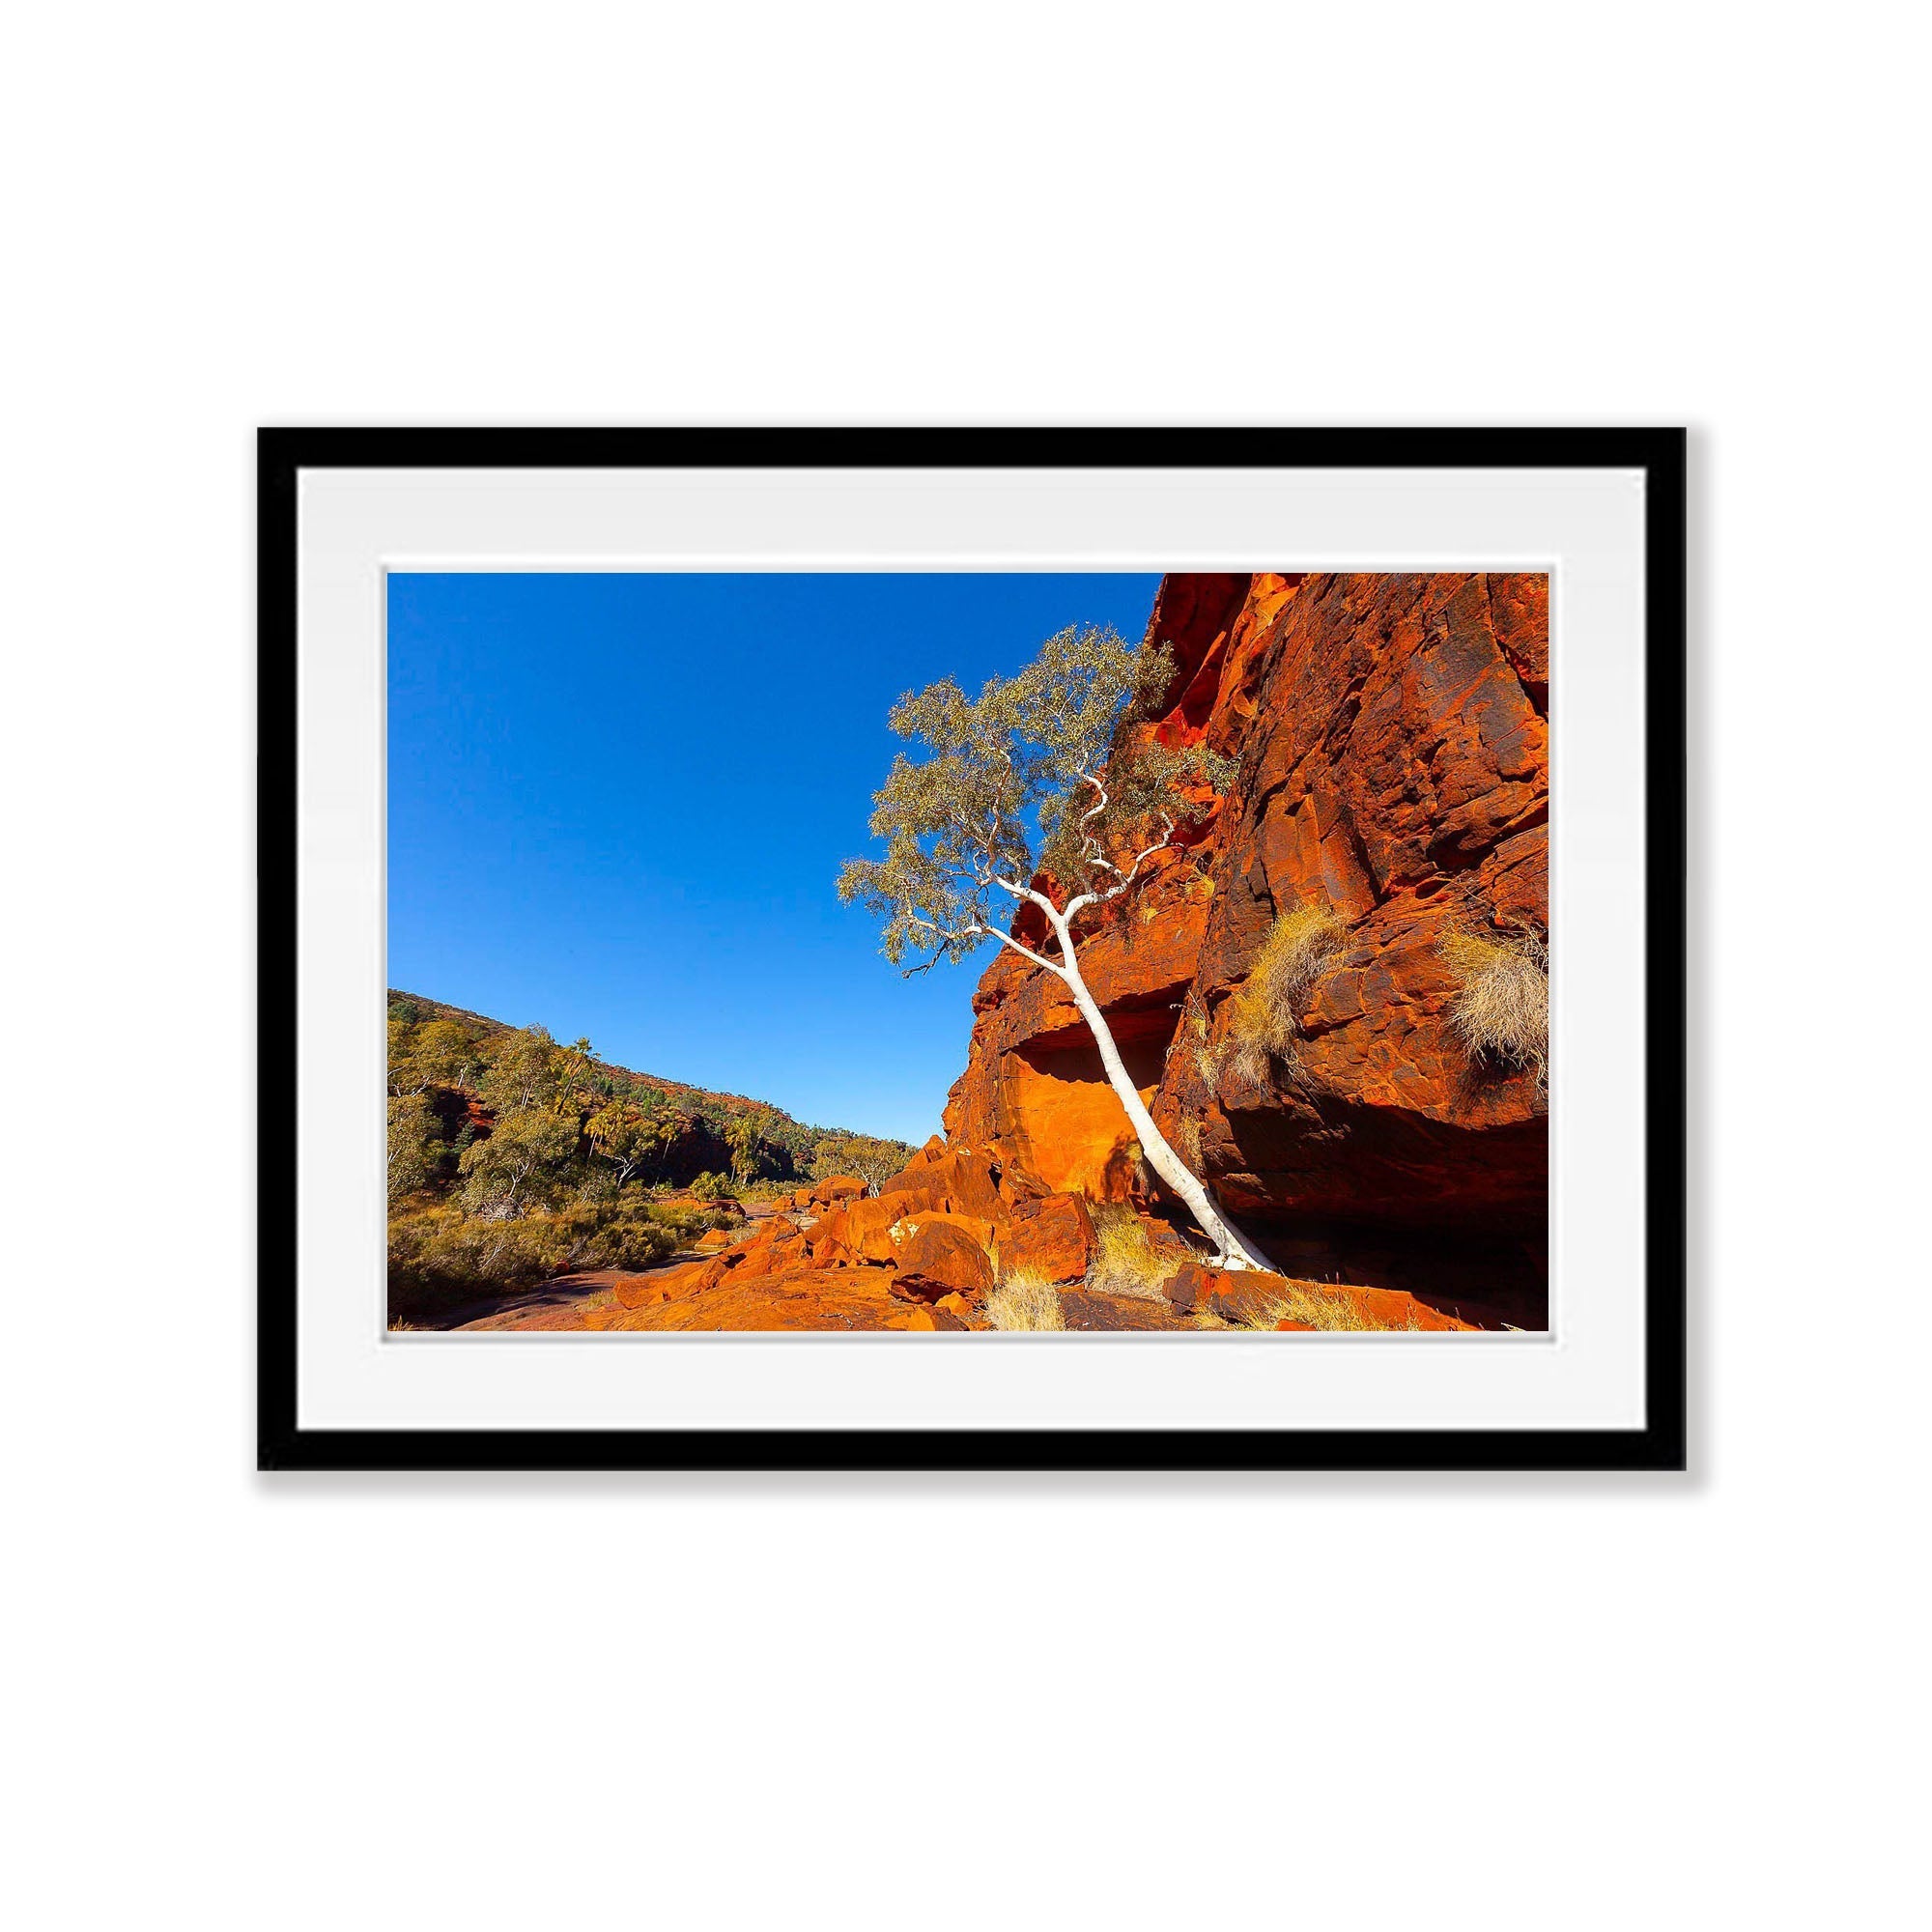 Lone Tree, Palm Valley Finke Gorge National Park - Northern Territory